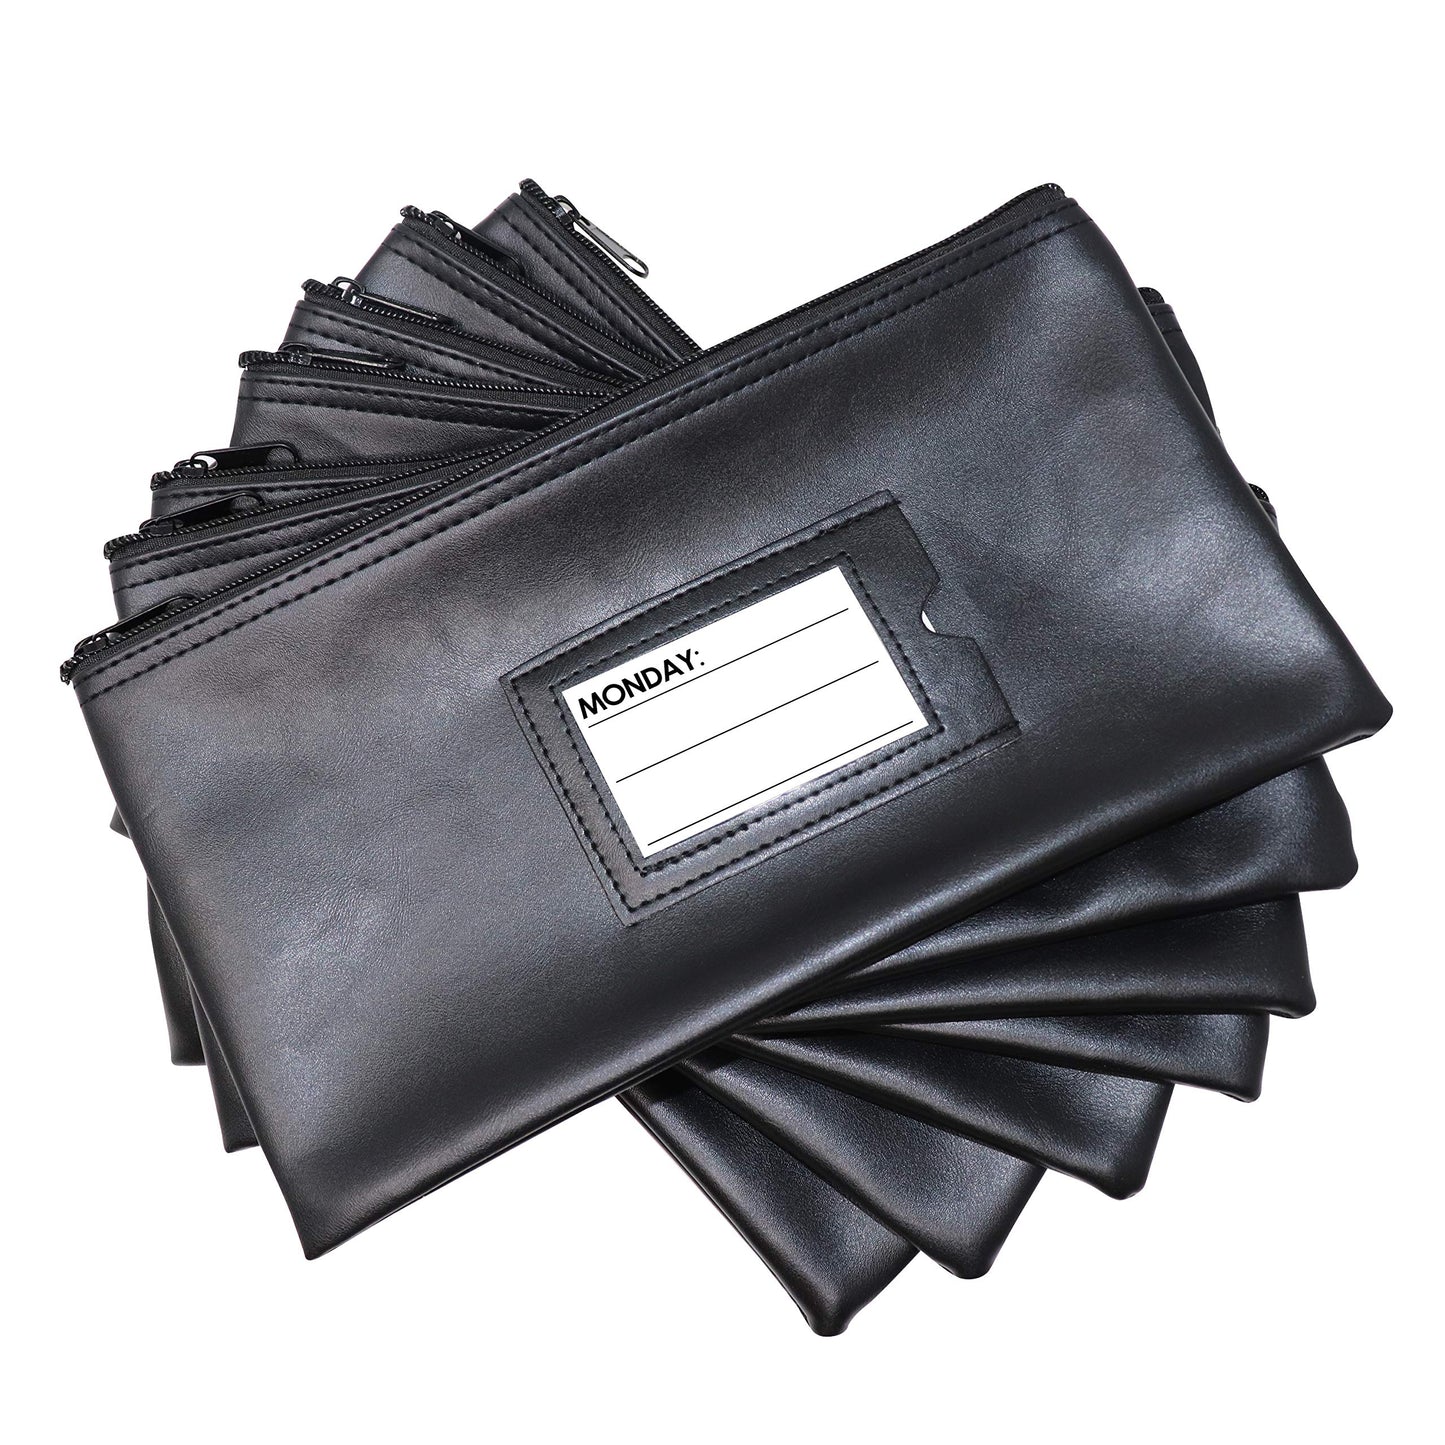 Black 7 Days Bank Deposit Cash and Coin Pouches, Black